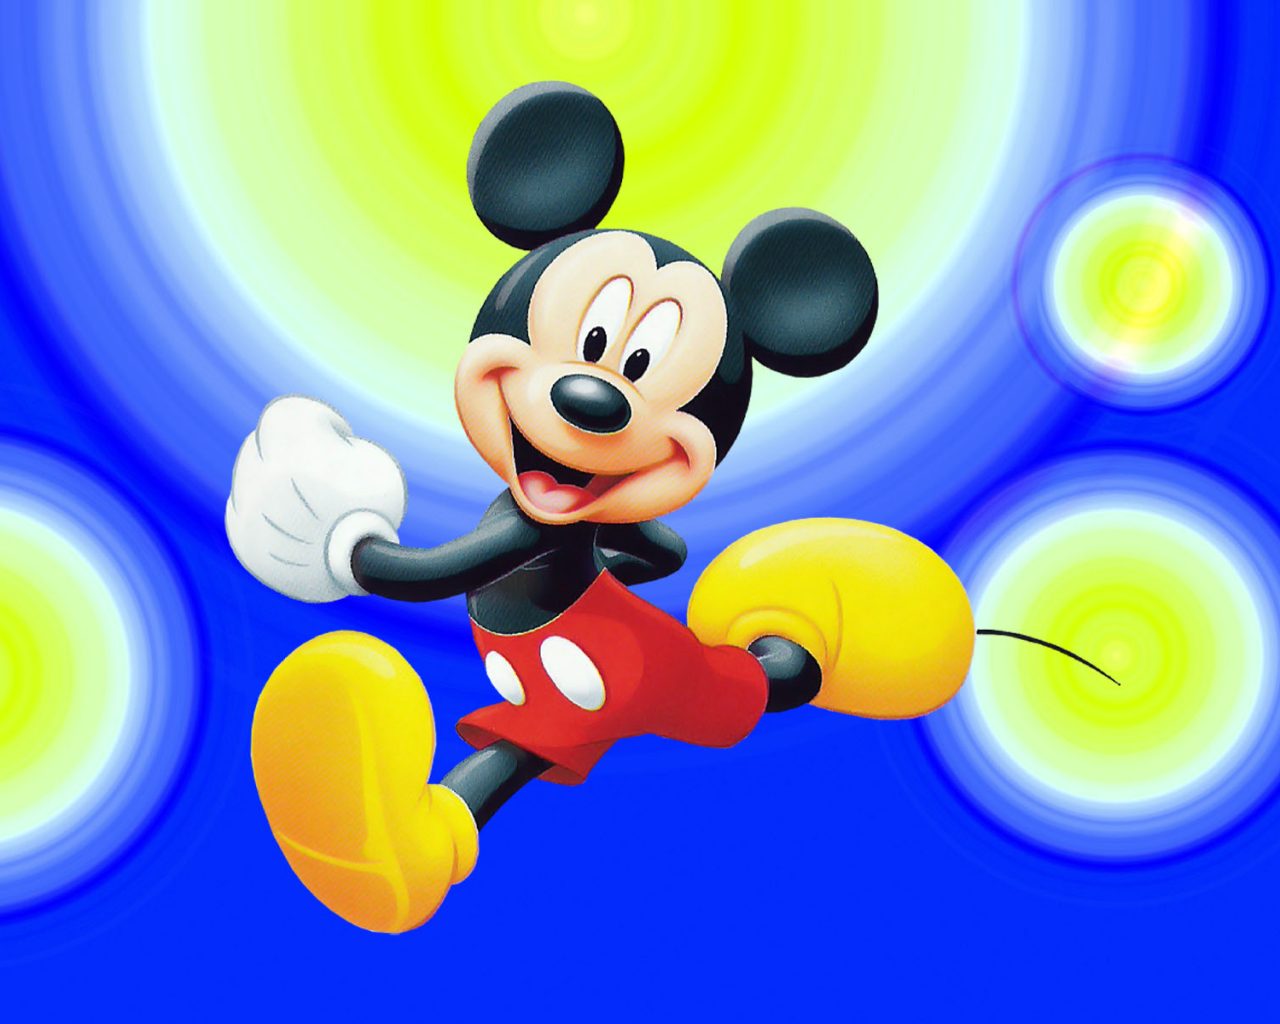 mickey mouse wallpaper for mobile,animated cartoon,cartoon,clip art,illustration,animation